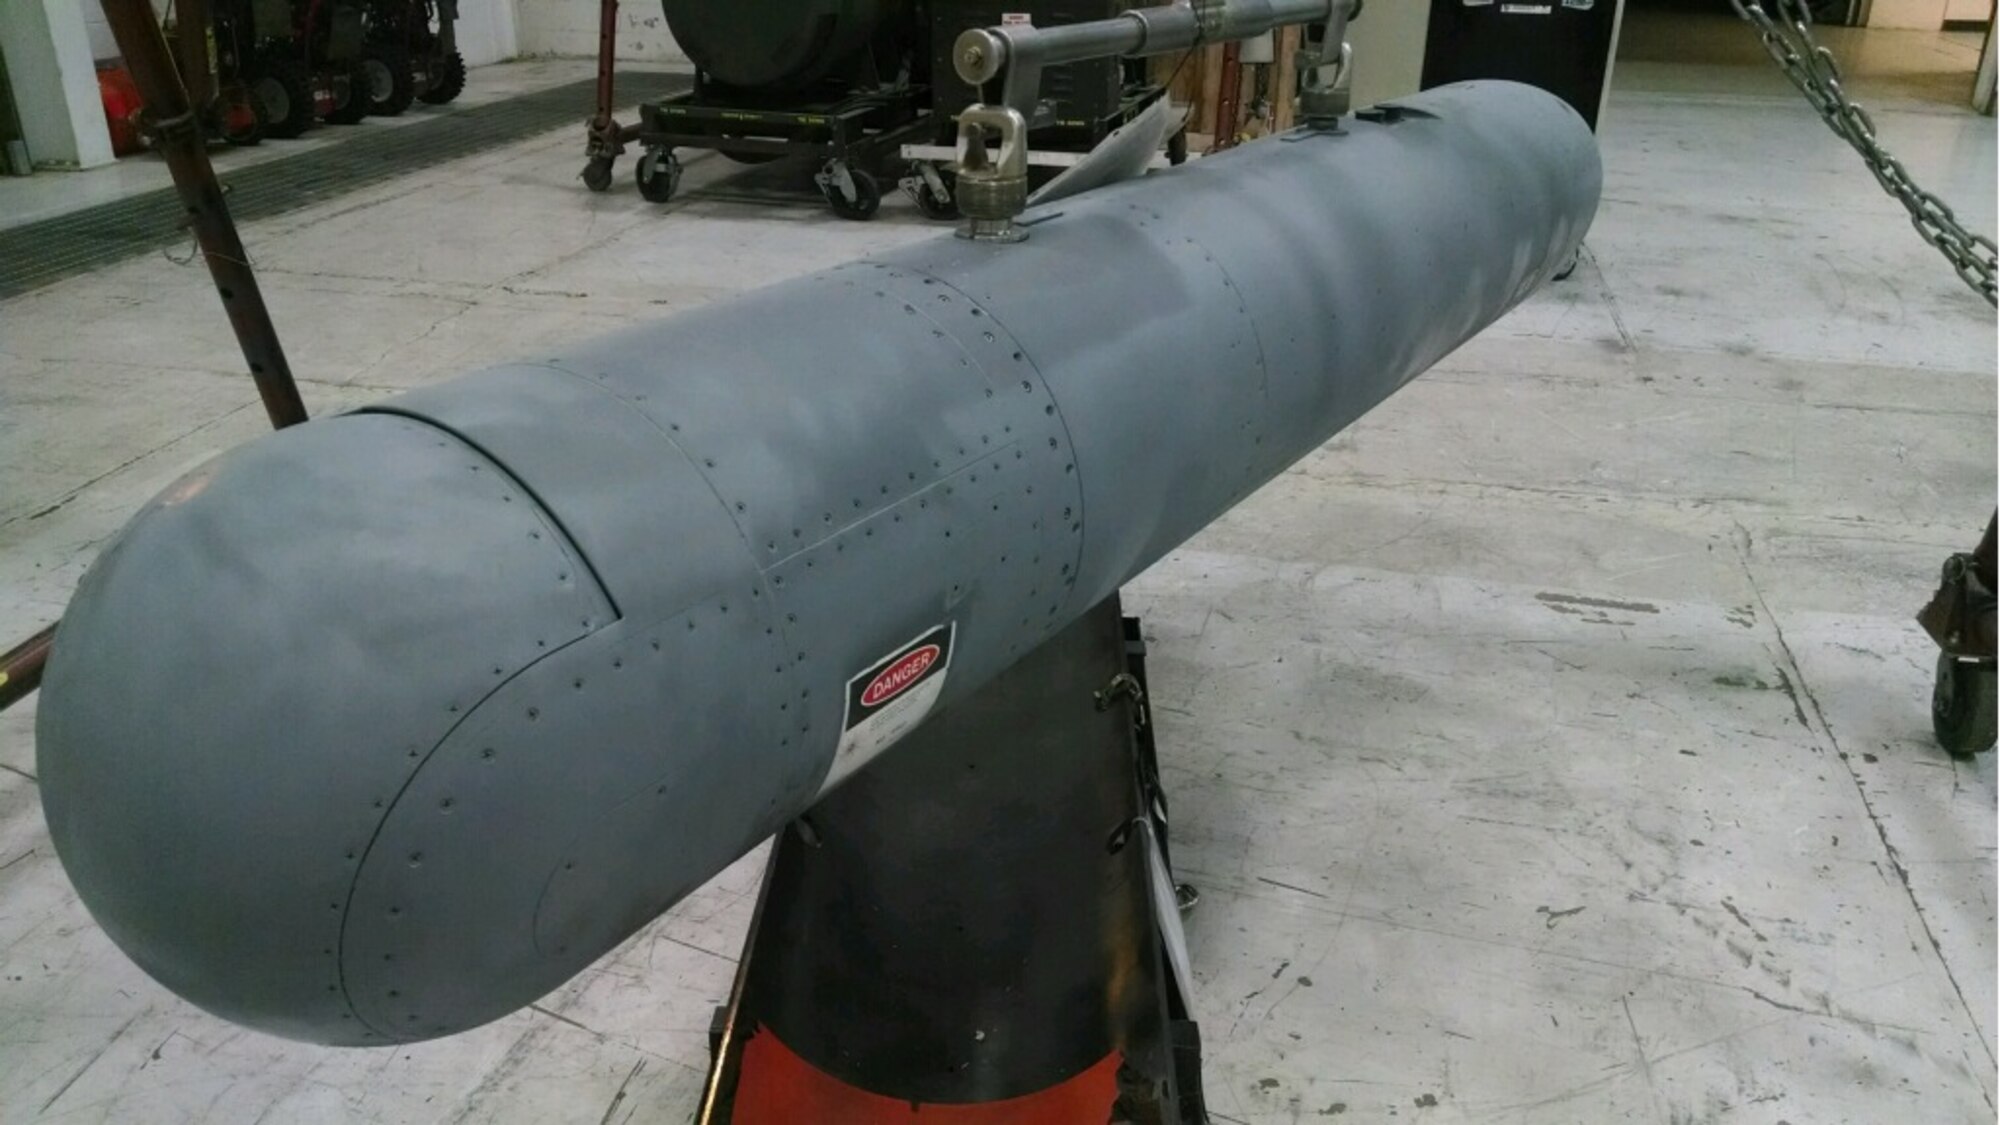 A targeting pod is hoisted in preparation for transport at Hill's LANTIRN CRF. 